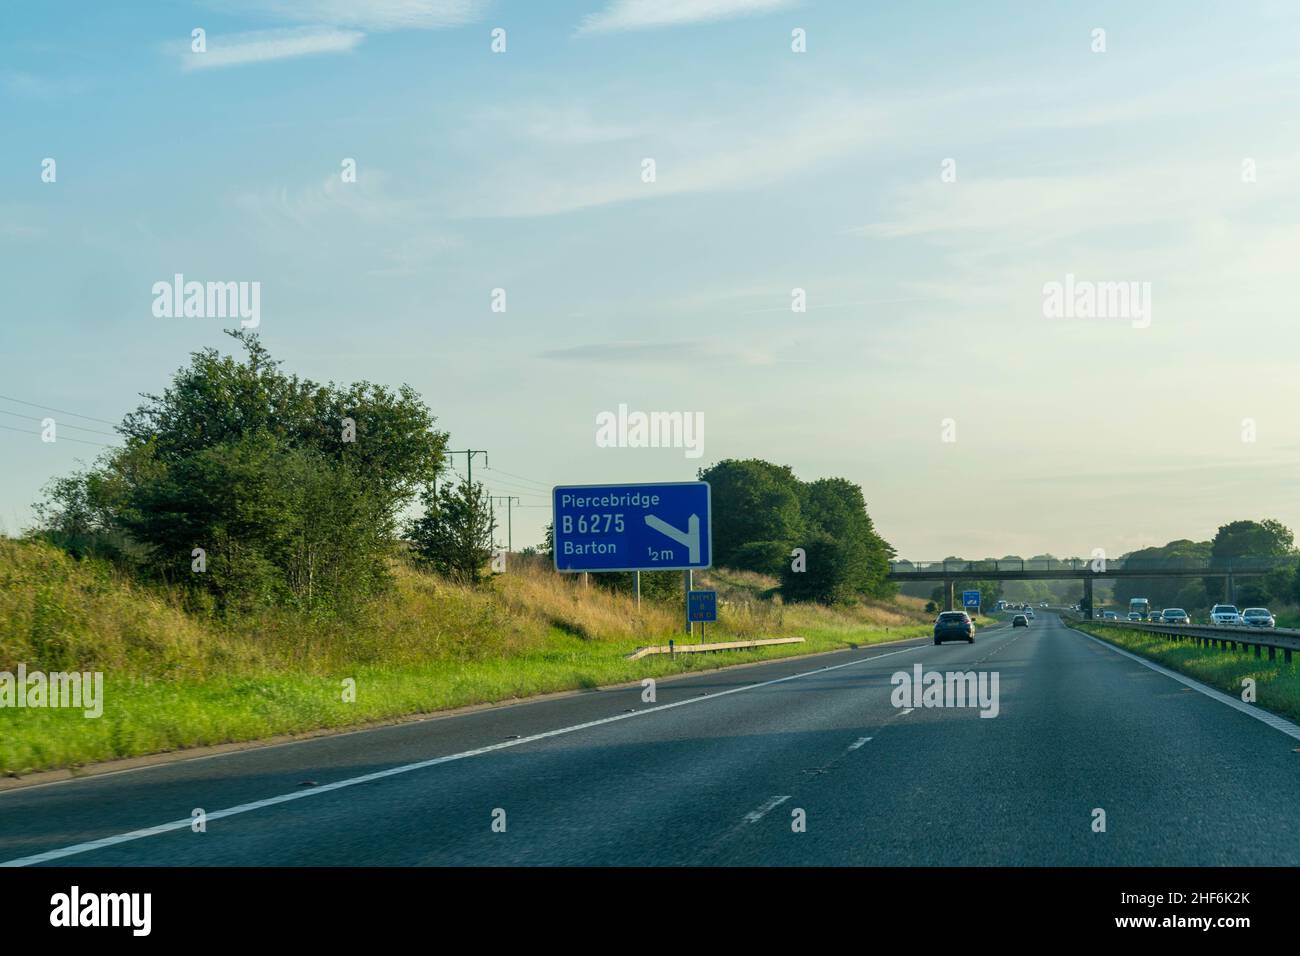 Darlington, UK - 23rd August 2019: Blue British Motorway sign with space for copy text on the A1 motorway directing traffic drivers towards Piercebrid Stock Photo